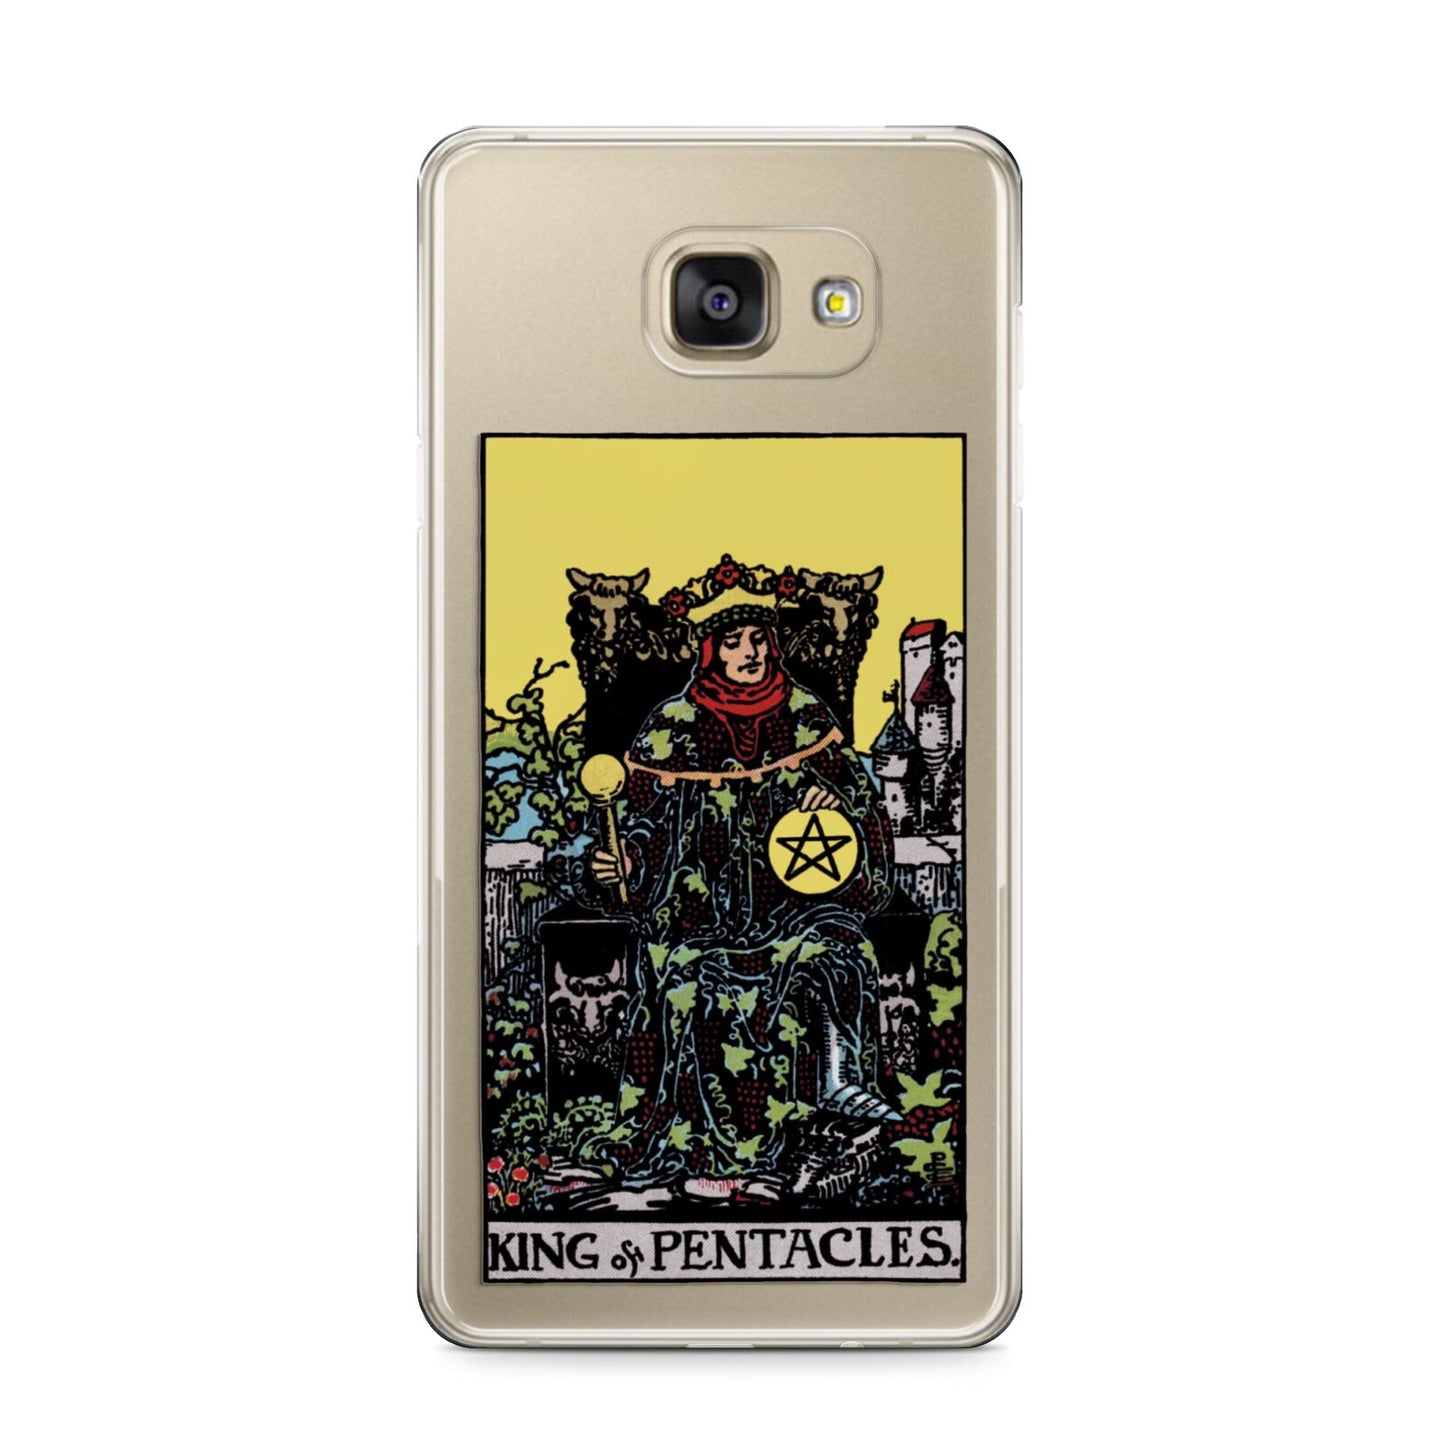 King of Pentacles Tarot Card Samsung Galaxy A9 2016 Case on gold phone